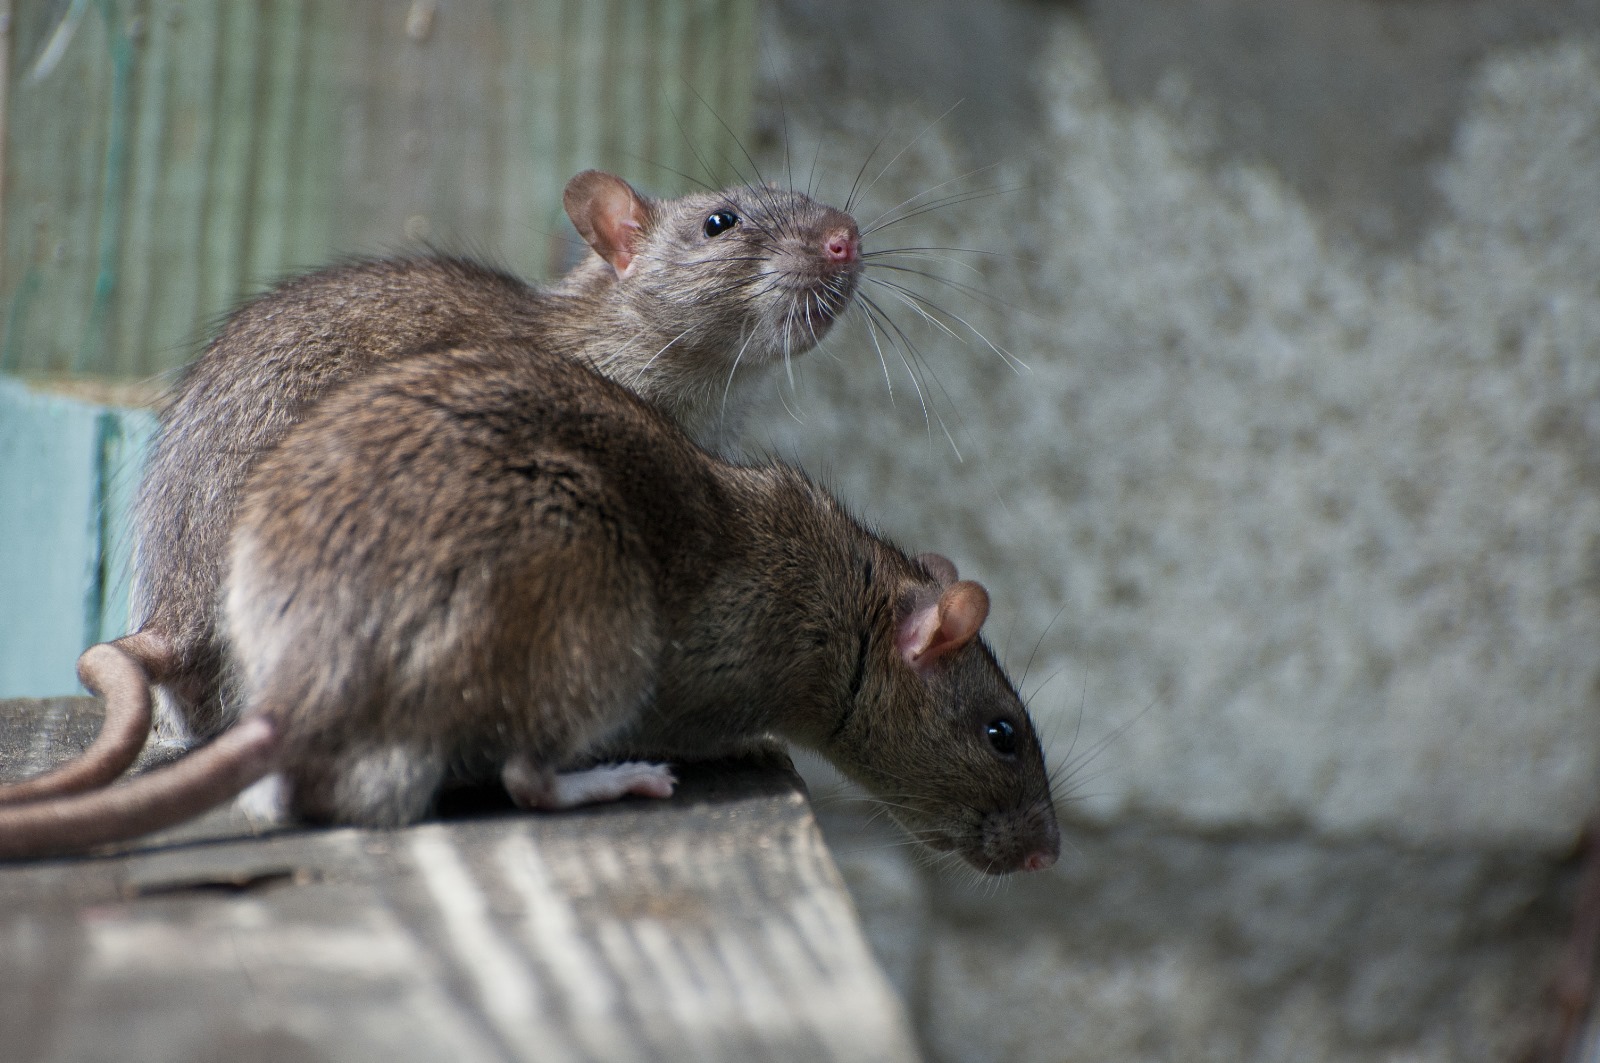 Rodent control in Meath and Louth